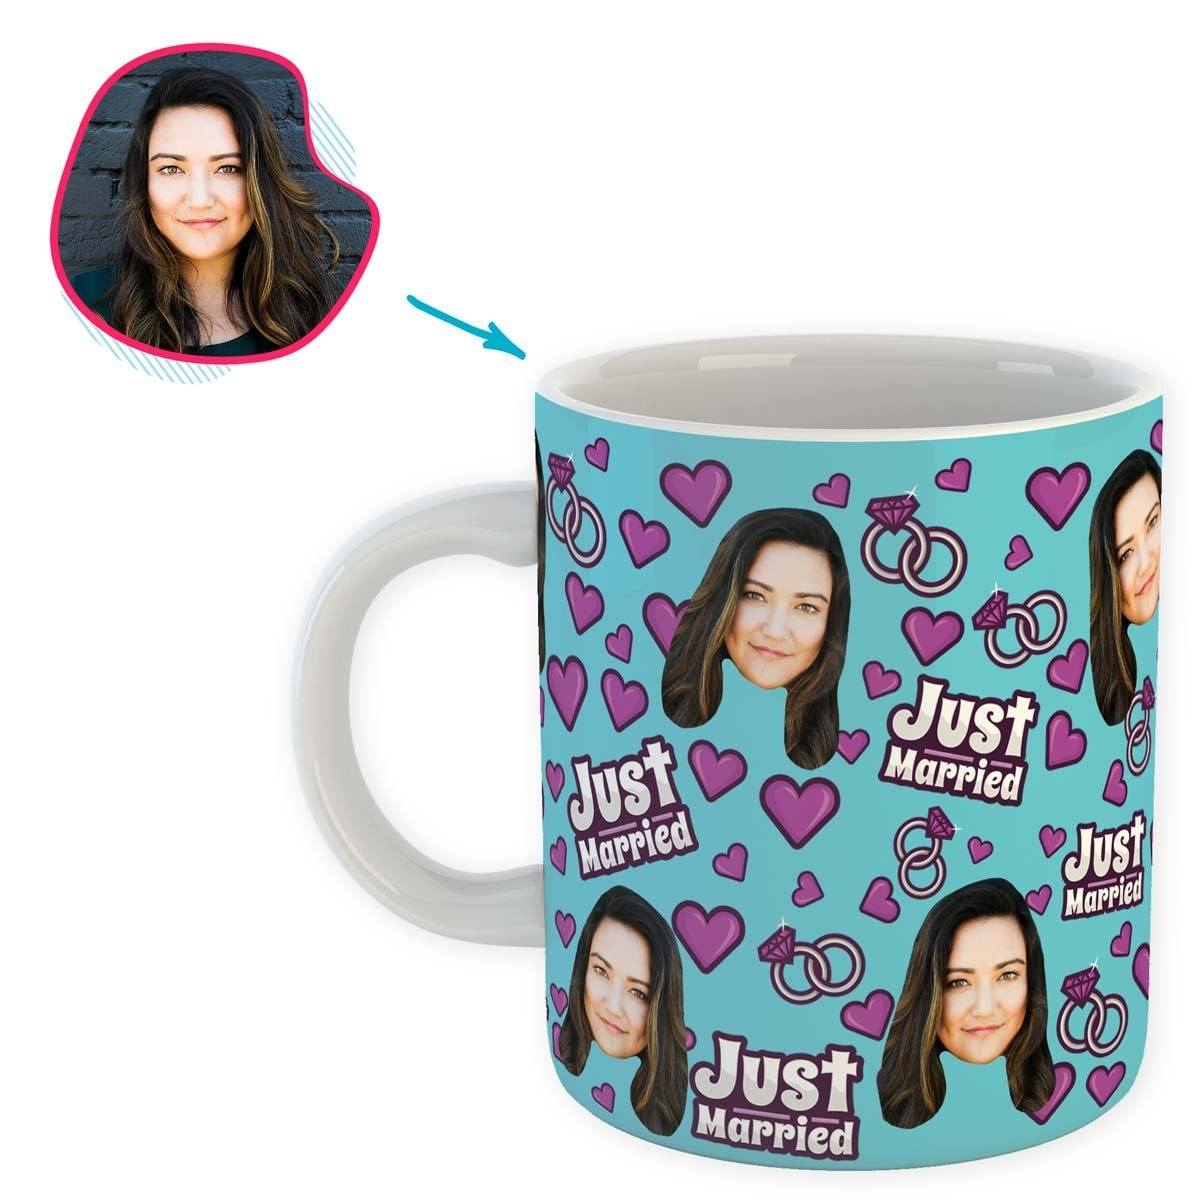 blue Just Married mug personalized with photo of face printed on it